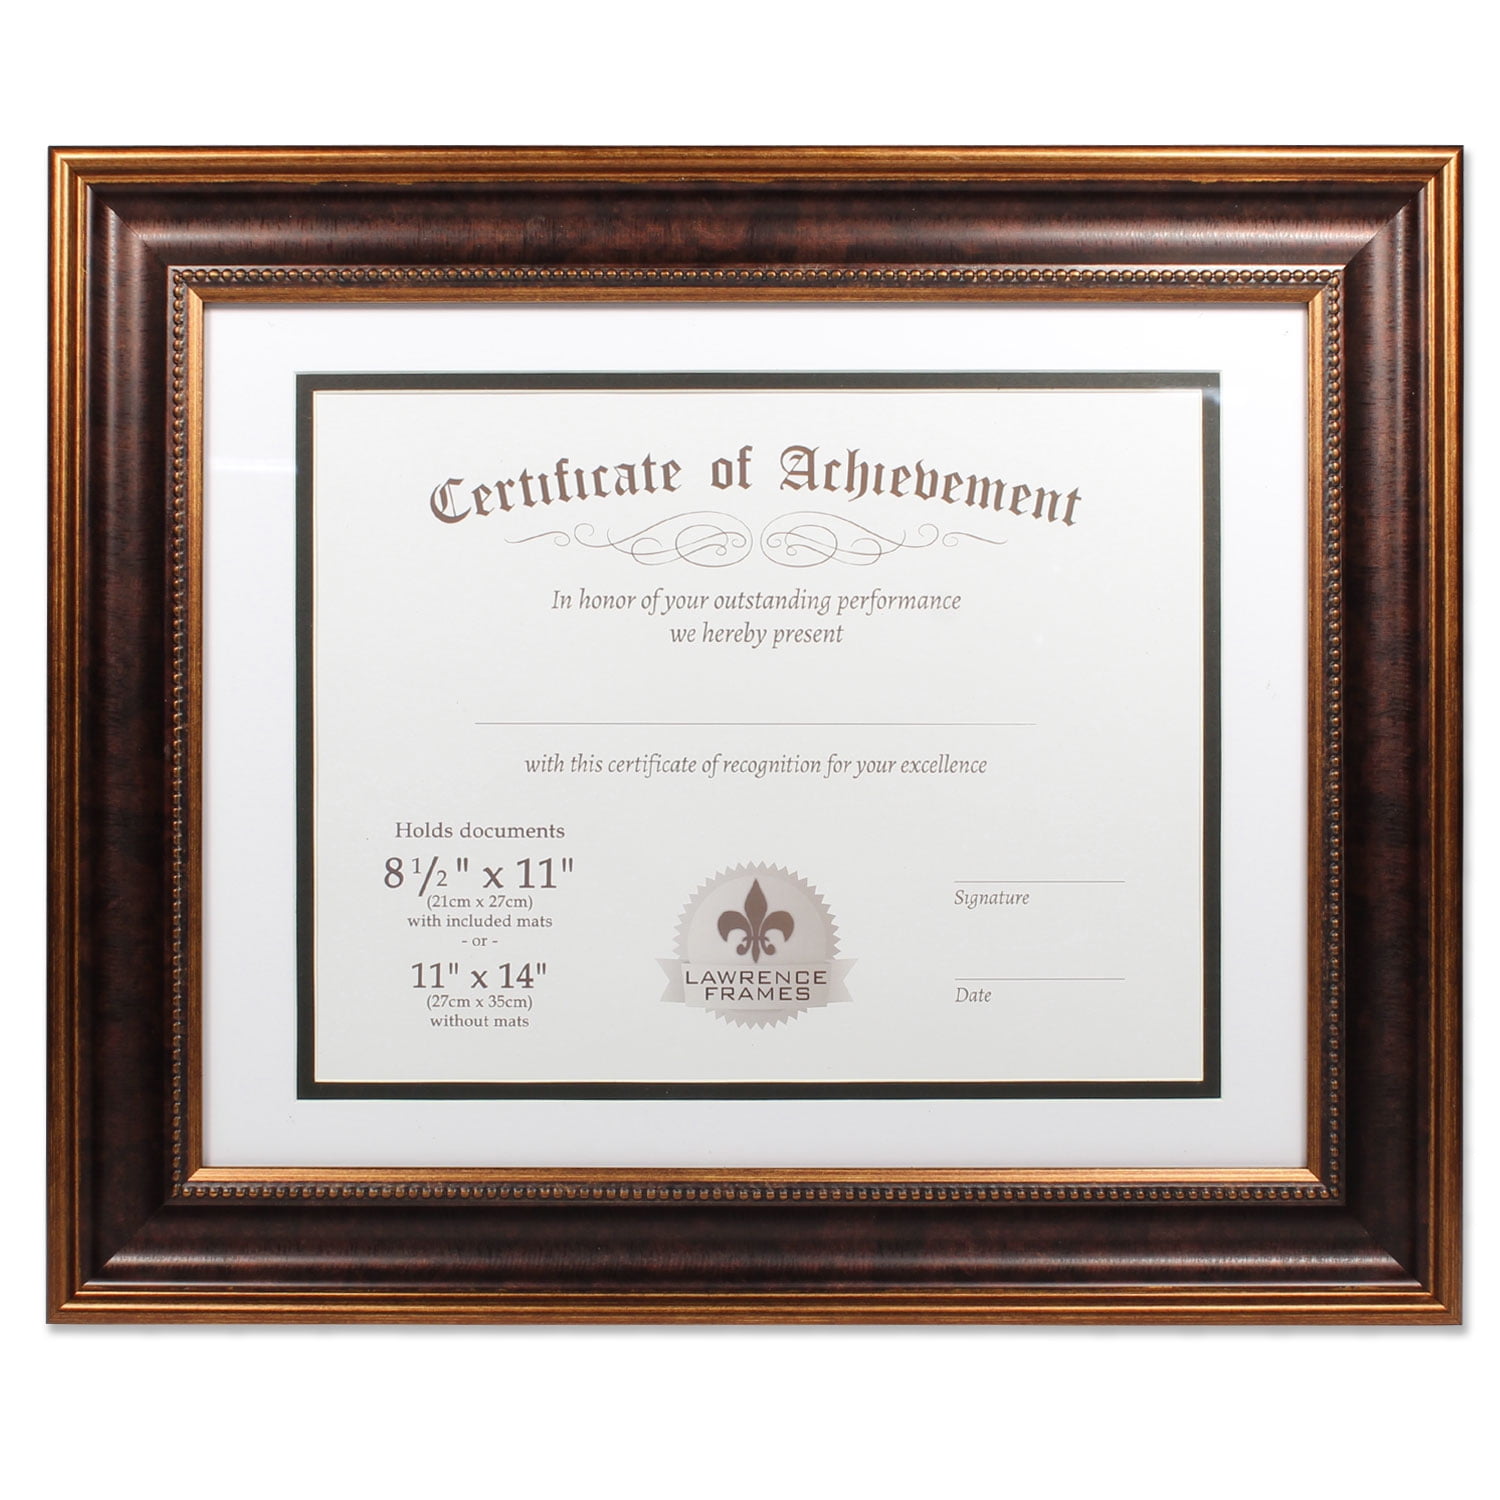 Details about   Creative Picture Frames 11x14-inch Mahogany Diploma Frame with Black Mat to Hold 